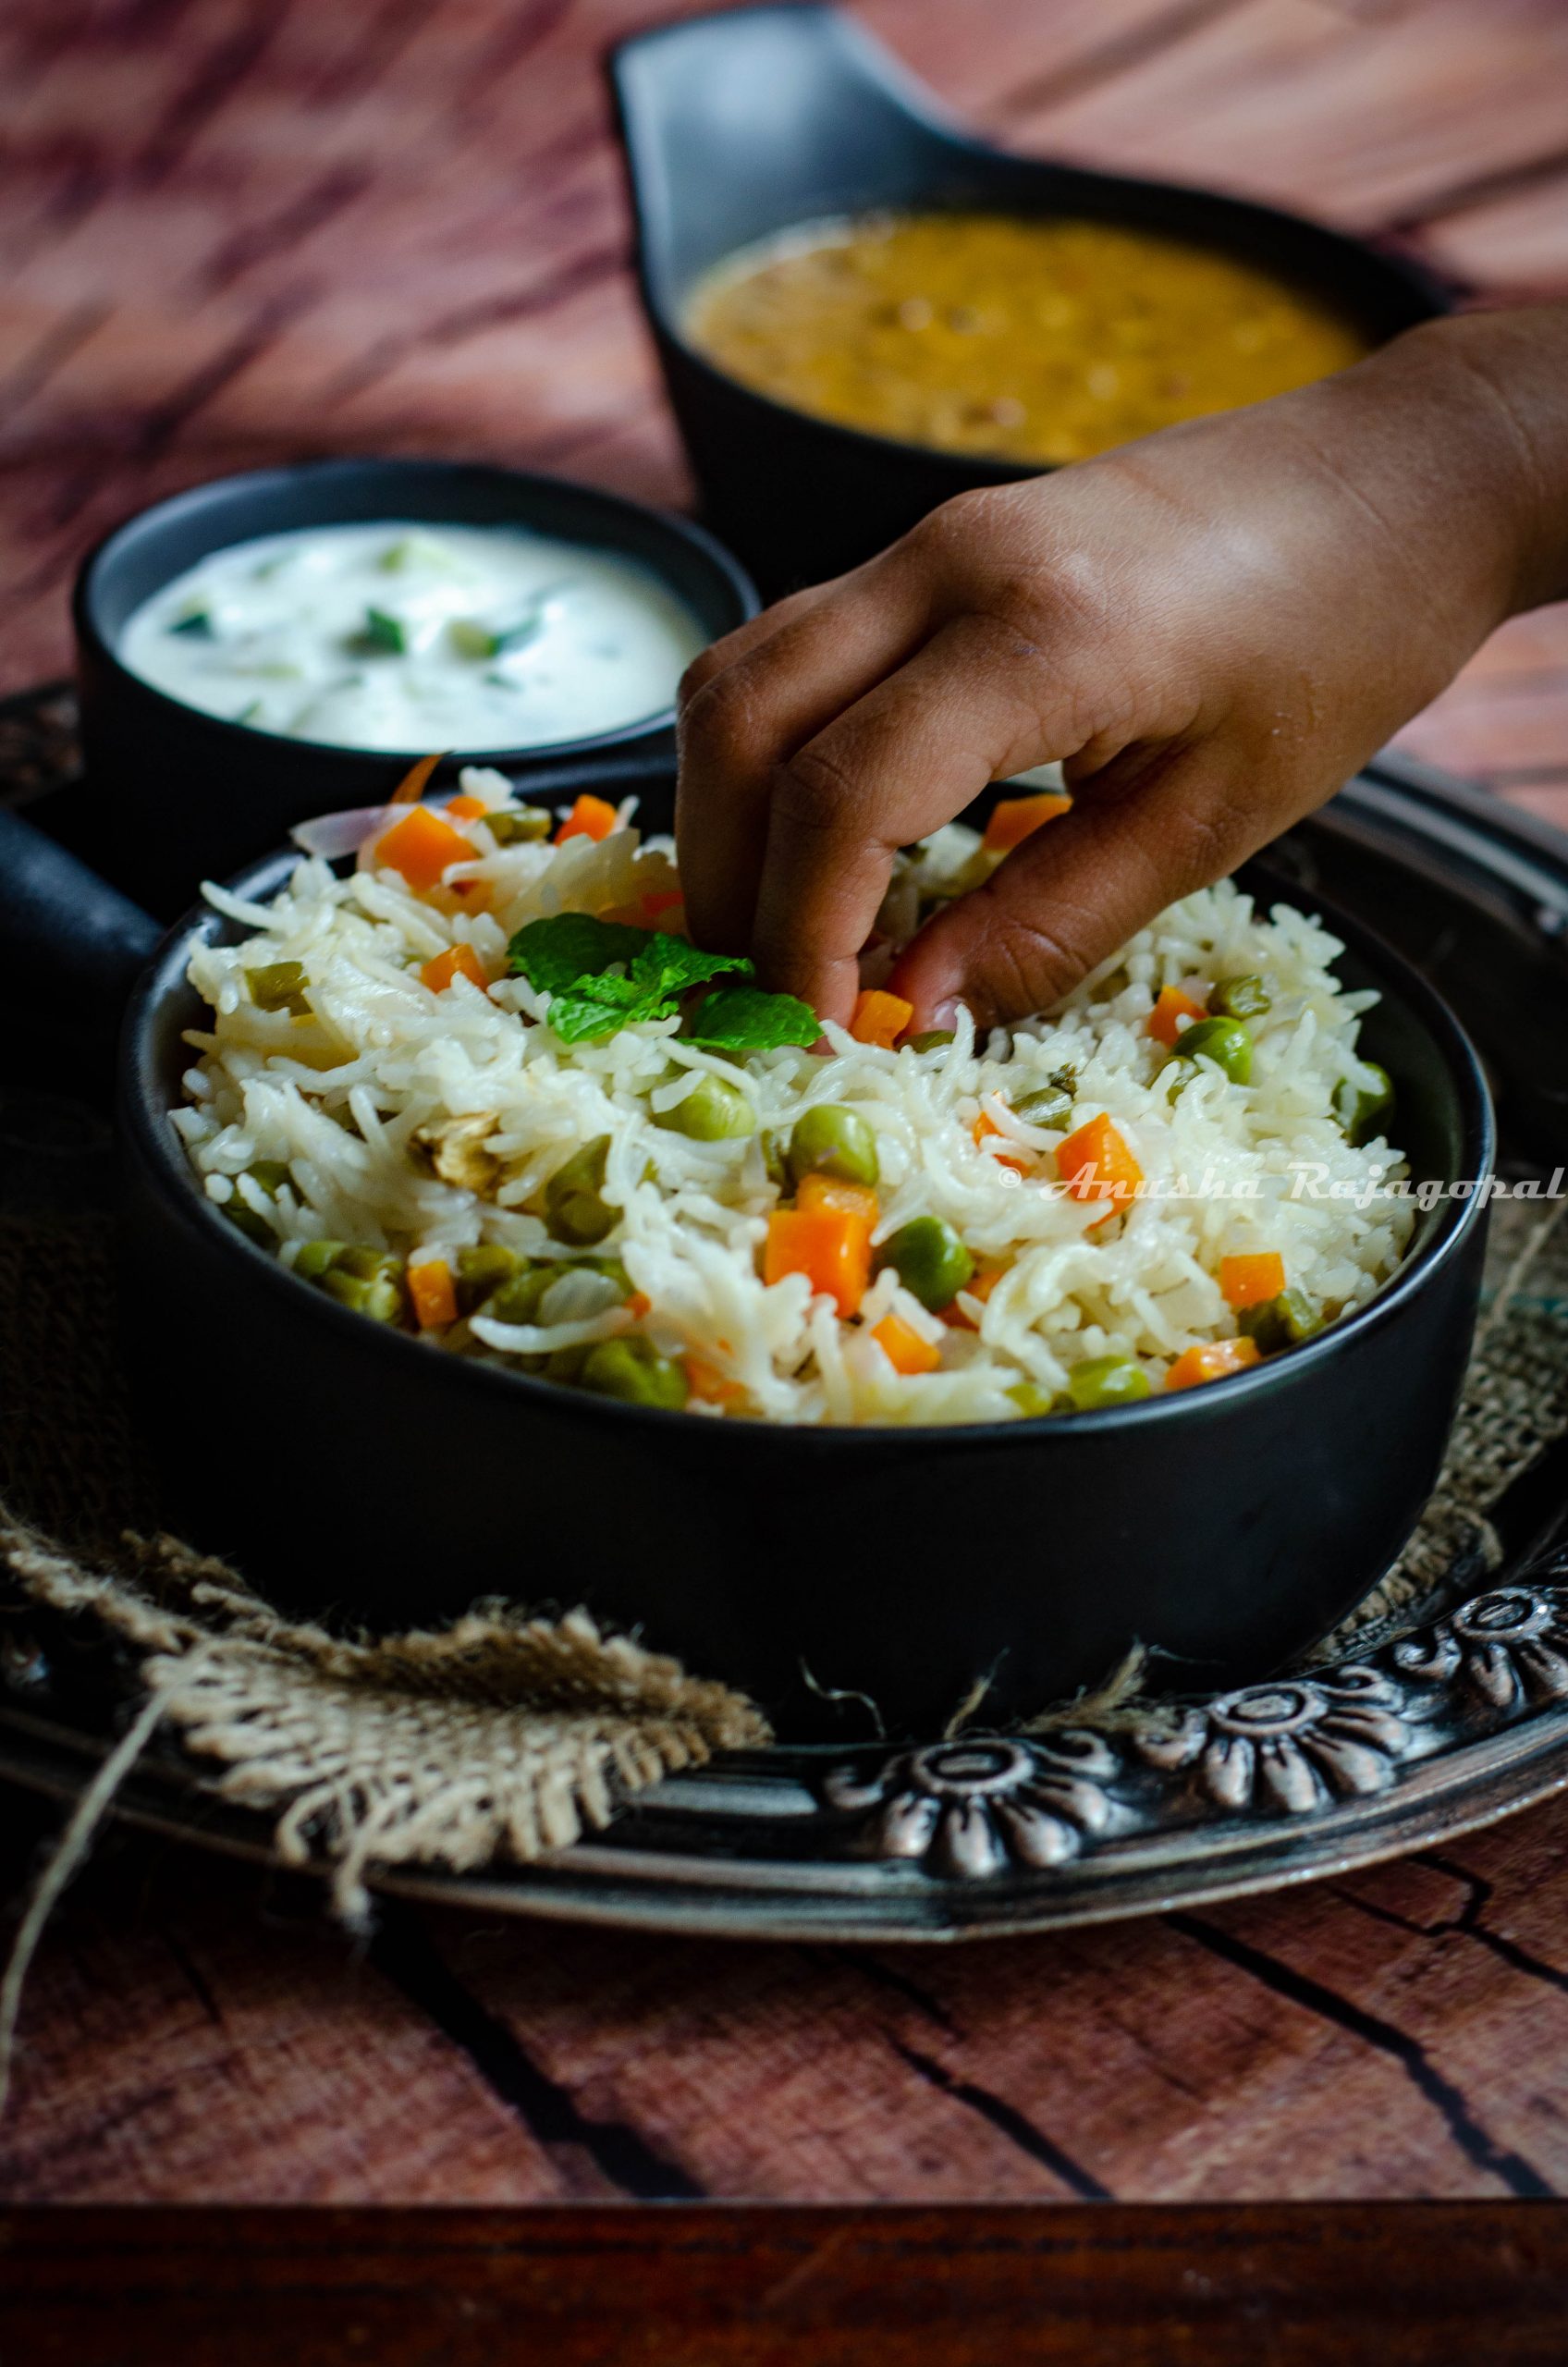 instant pot vegetable pulao in a black bowl served with cucumber raita. both bowls placed on a burlap mat over a rustic platter. A kid reaches out to take some carrots off the bowl.